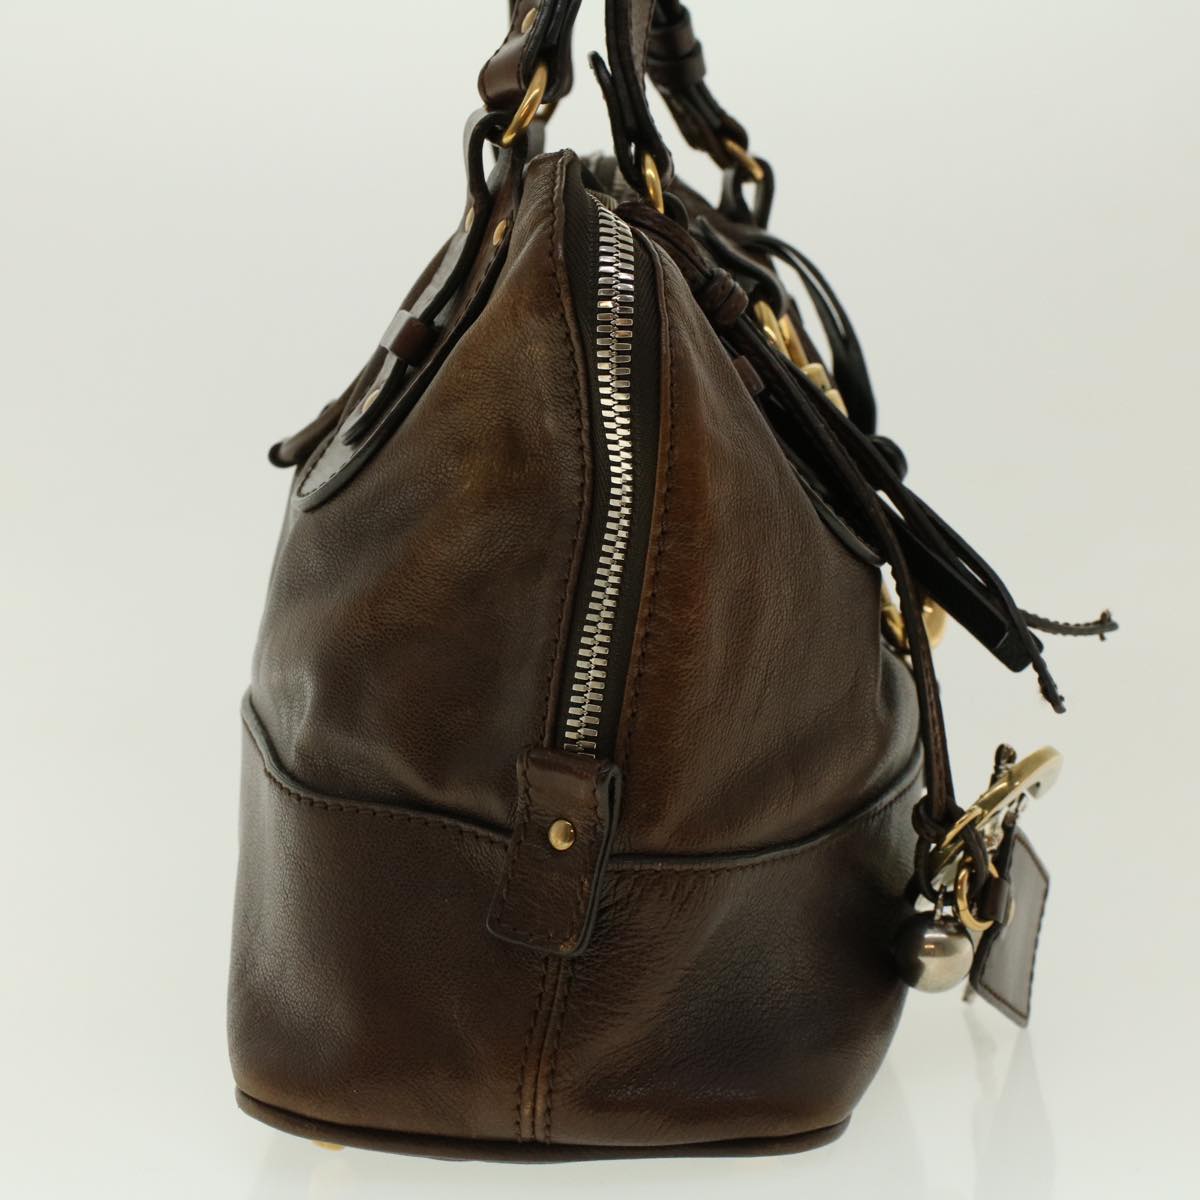 Chloe Hand Bag Leather Brown 01-08-51-5267 Auth bs5116 - 0